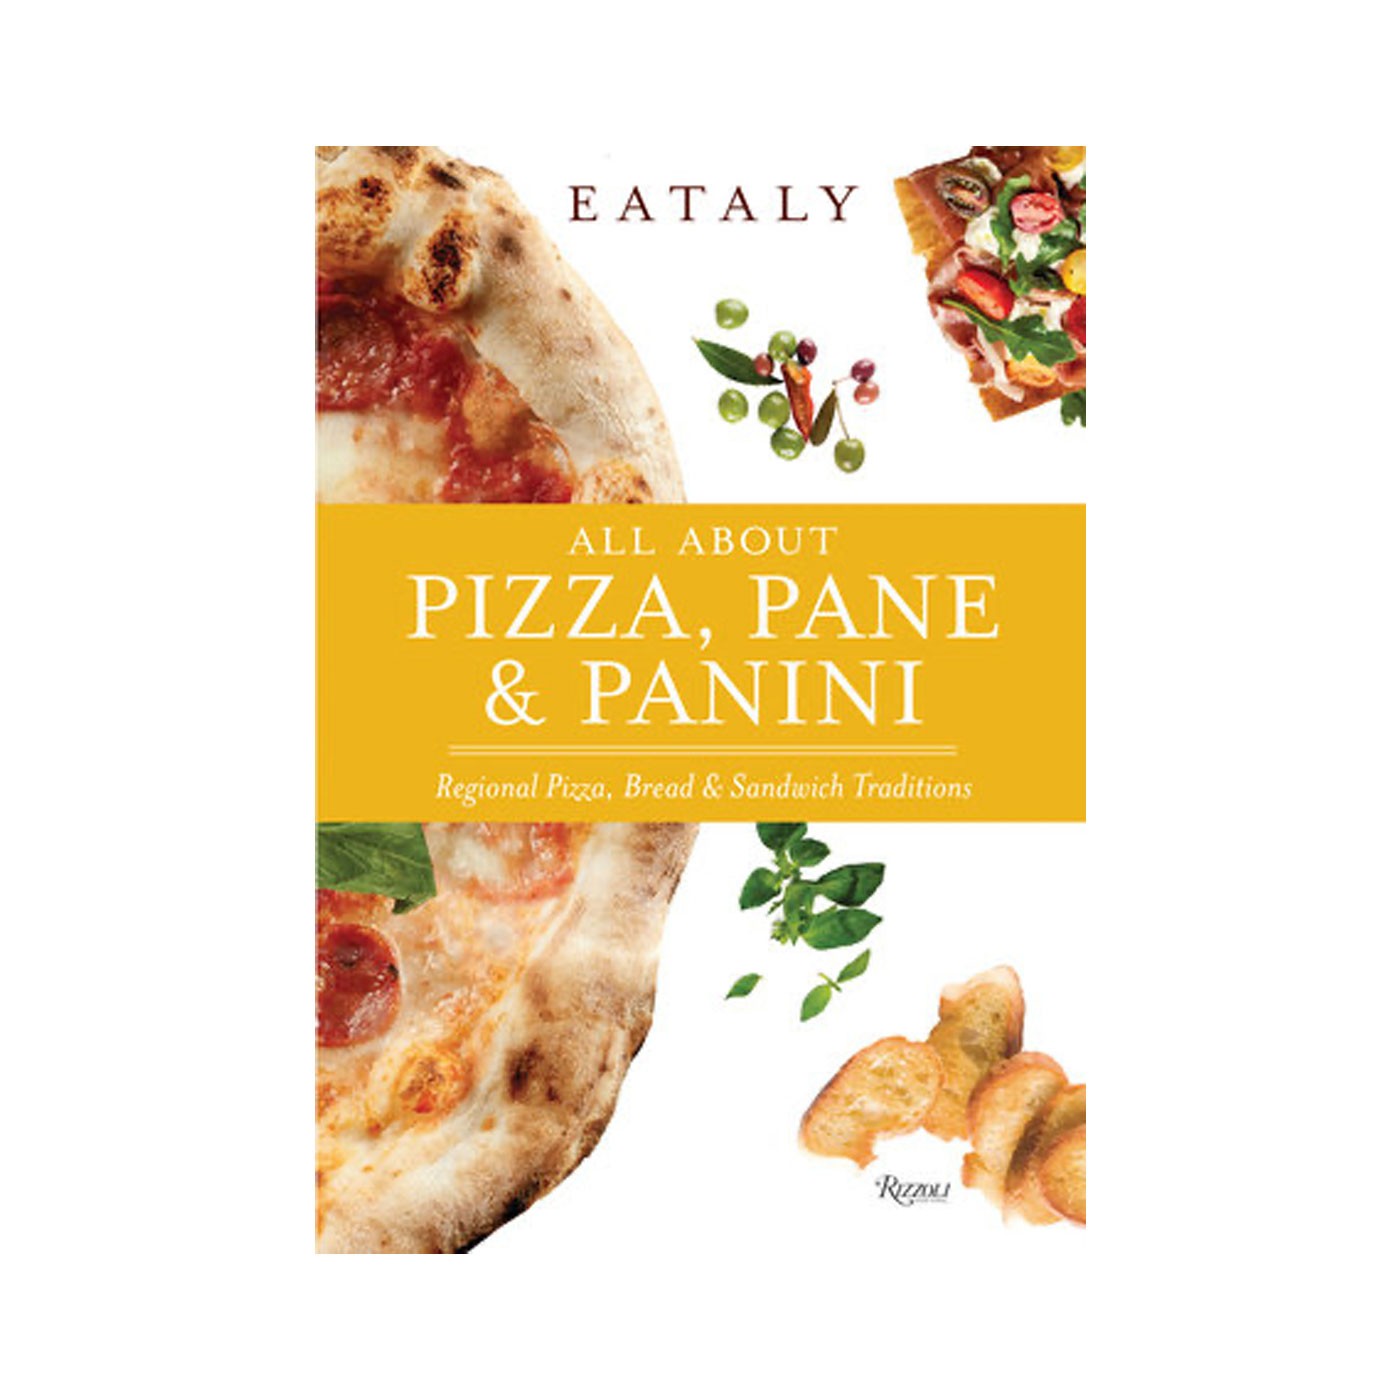 All About Pizza, Pane & Panini